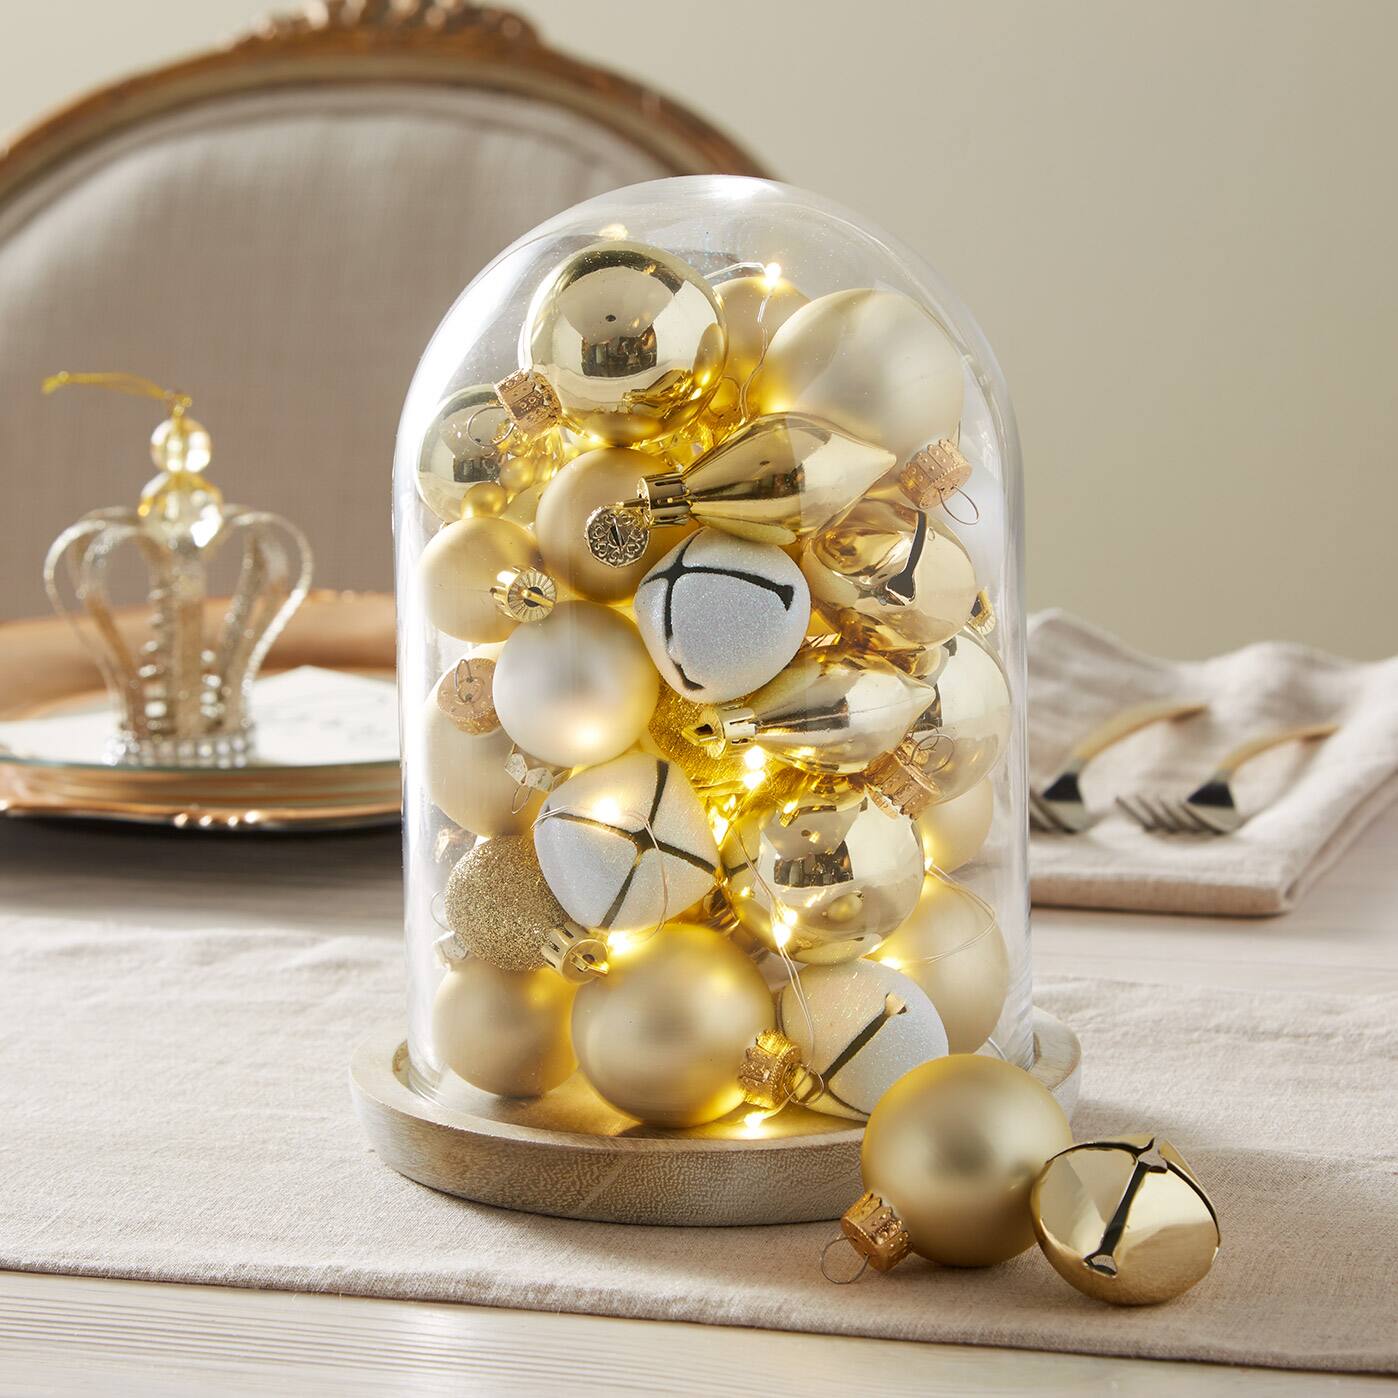 Miniature Ornaments in Cloche, Projects